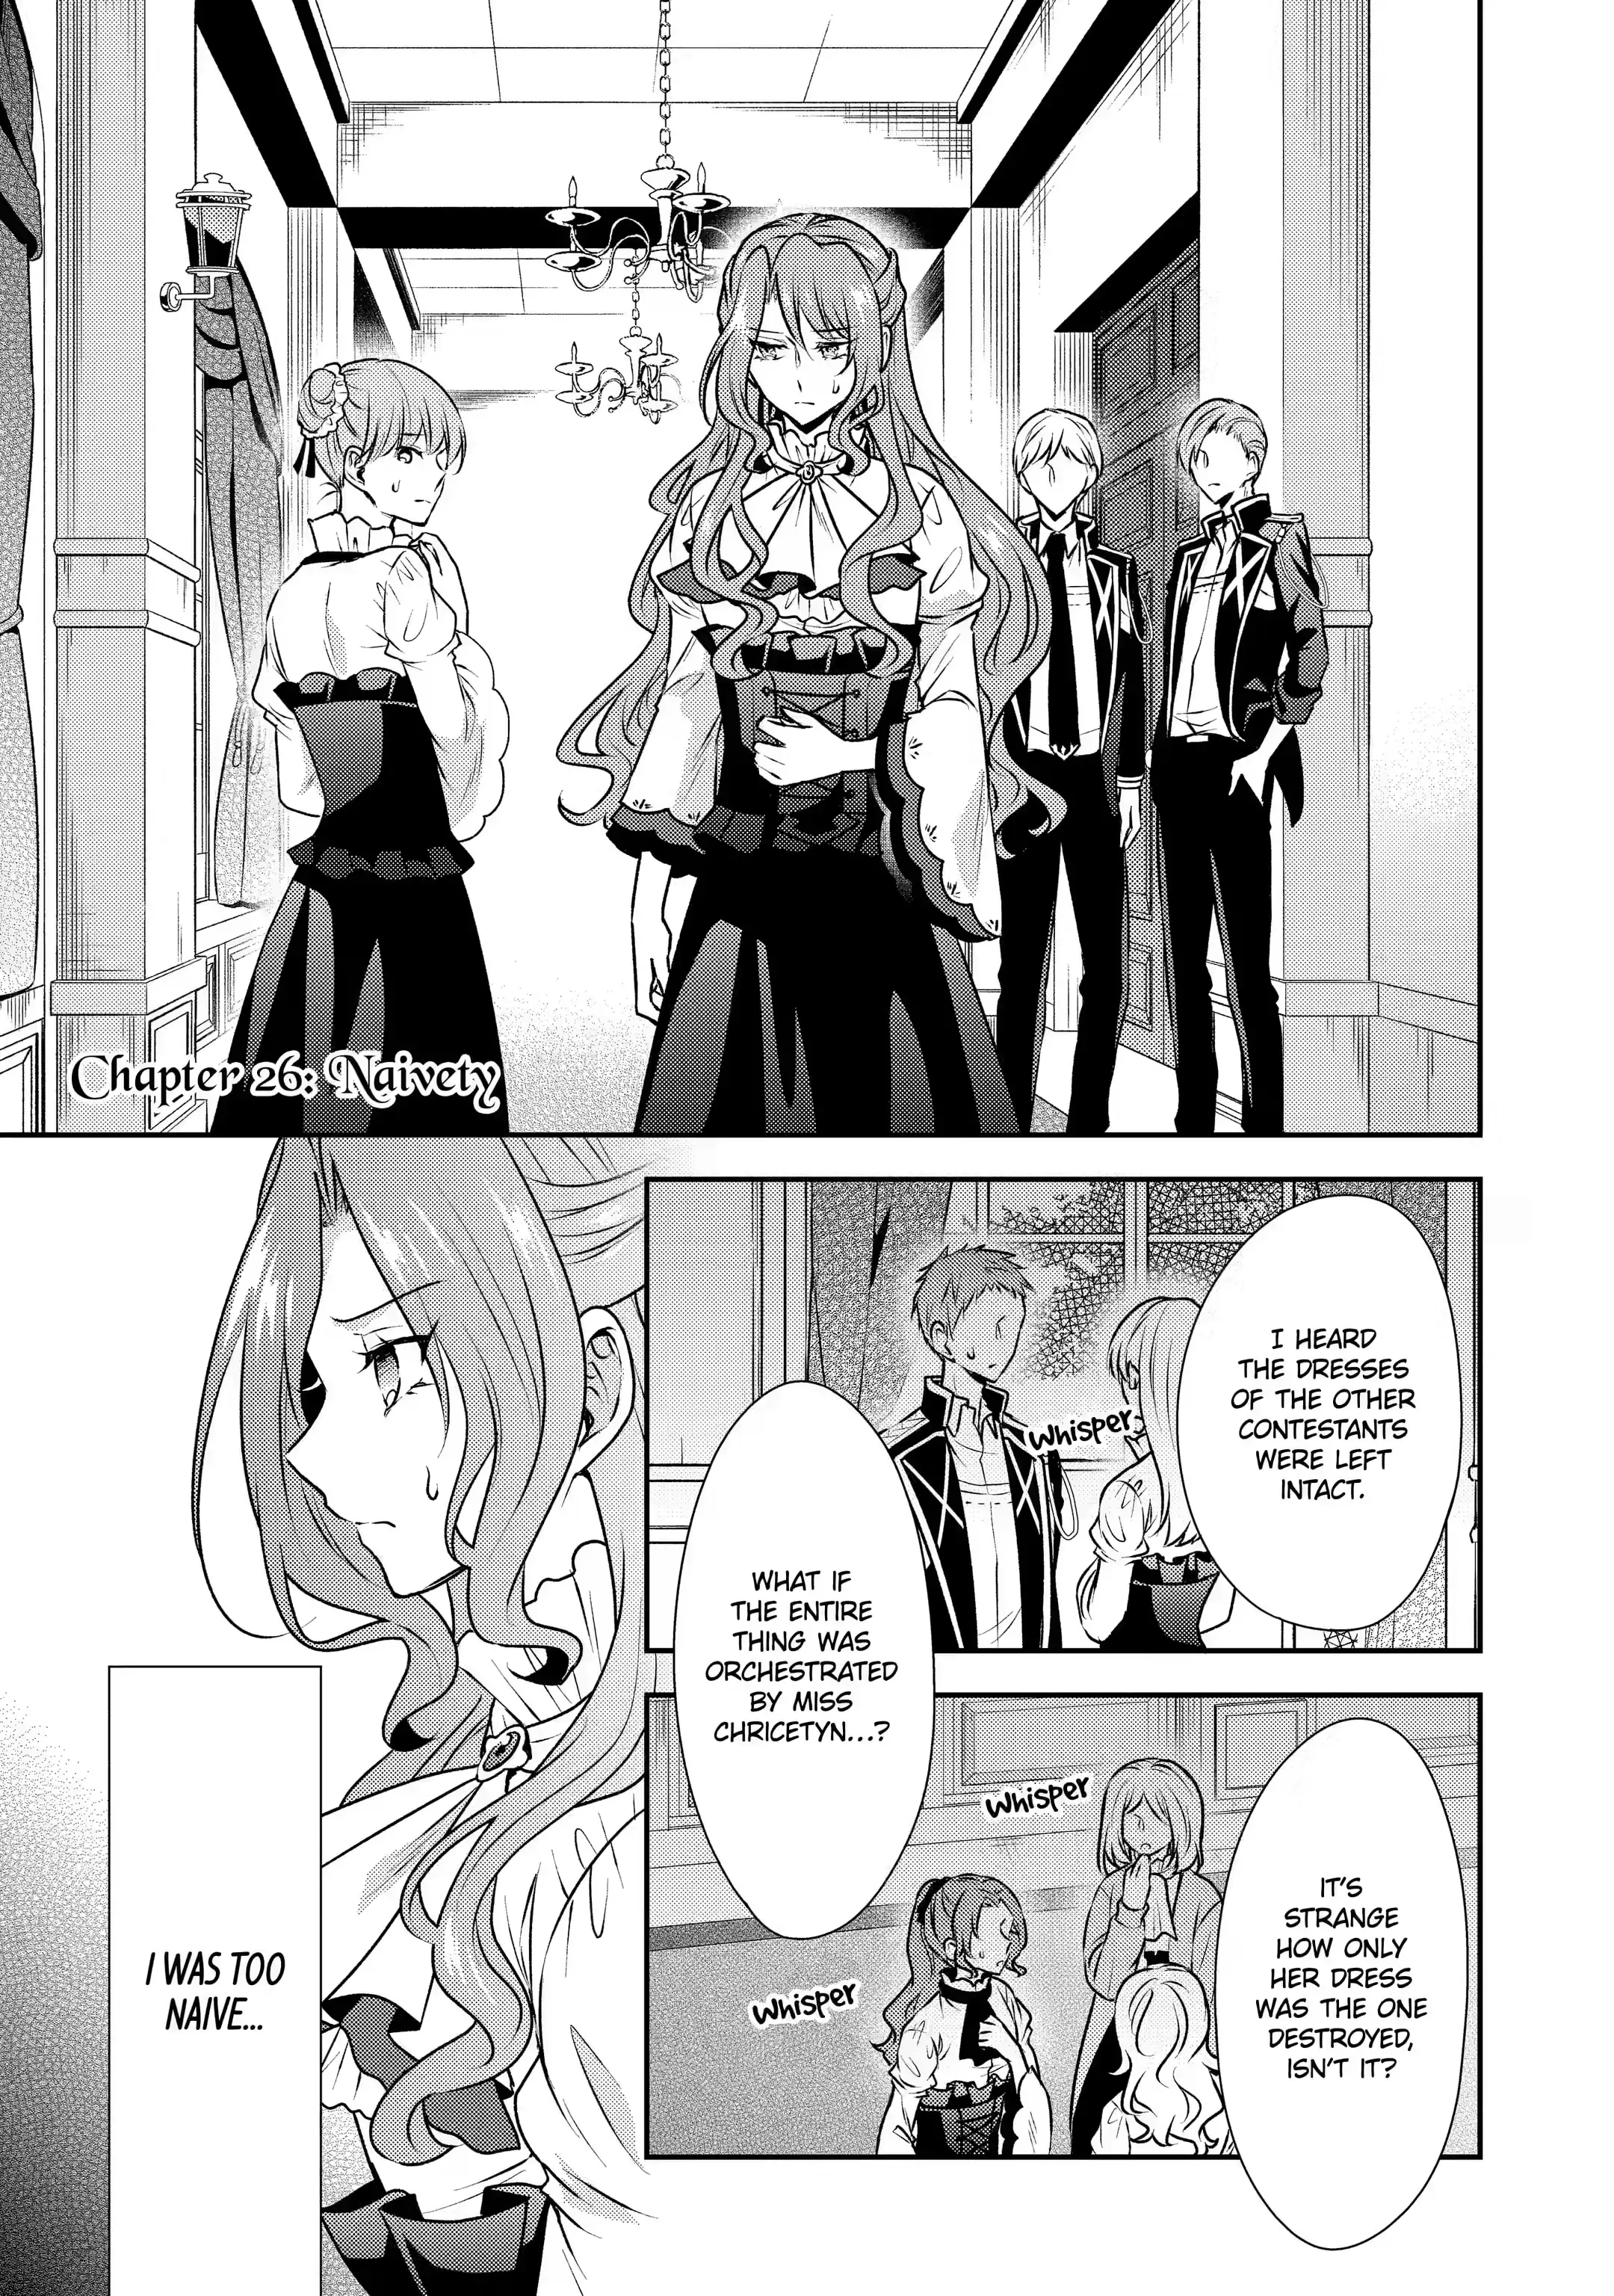 Auto-Mode Expired In The 6Th Round Of The Otome Game - Page 1